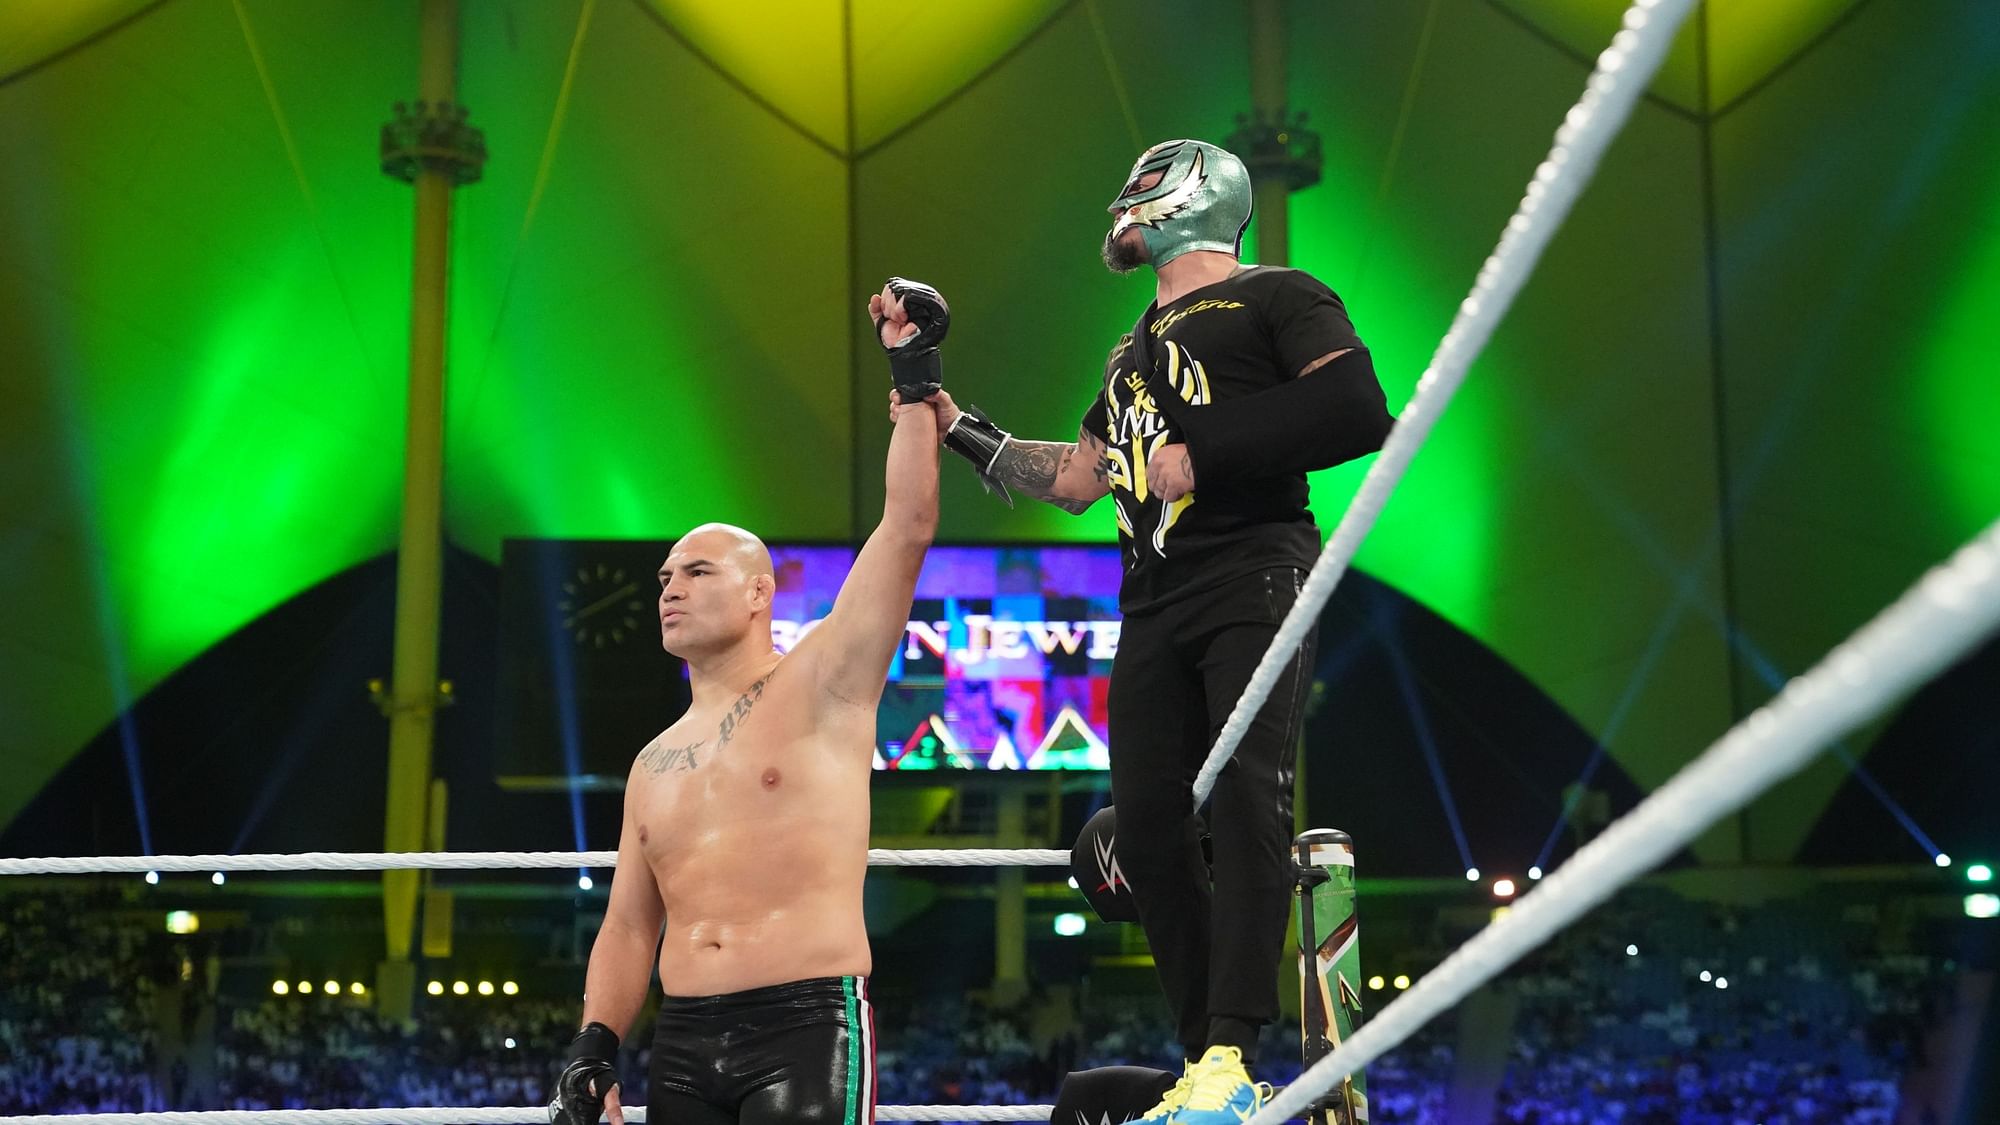 Crown Jewel is WWE’s fourth pay-per-view event in Saudi Arabia.